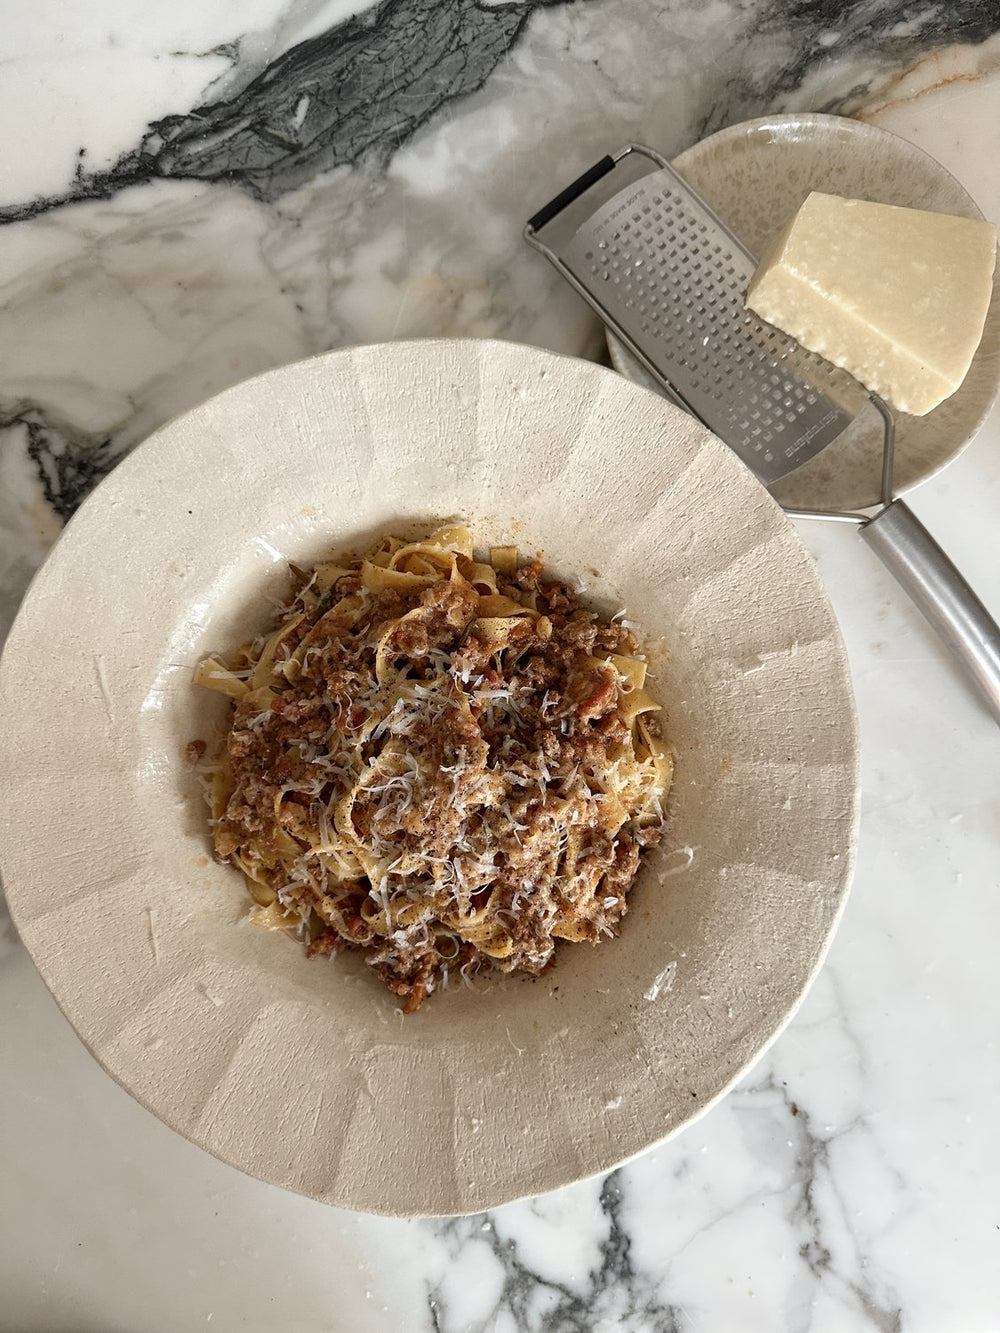 Athena Calderone's Classic Bolognese Recipe Is Easy and Oh-So-Delicious!